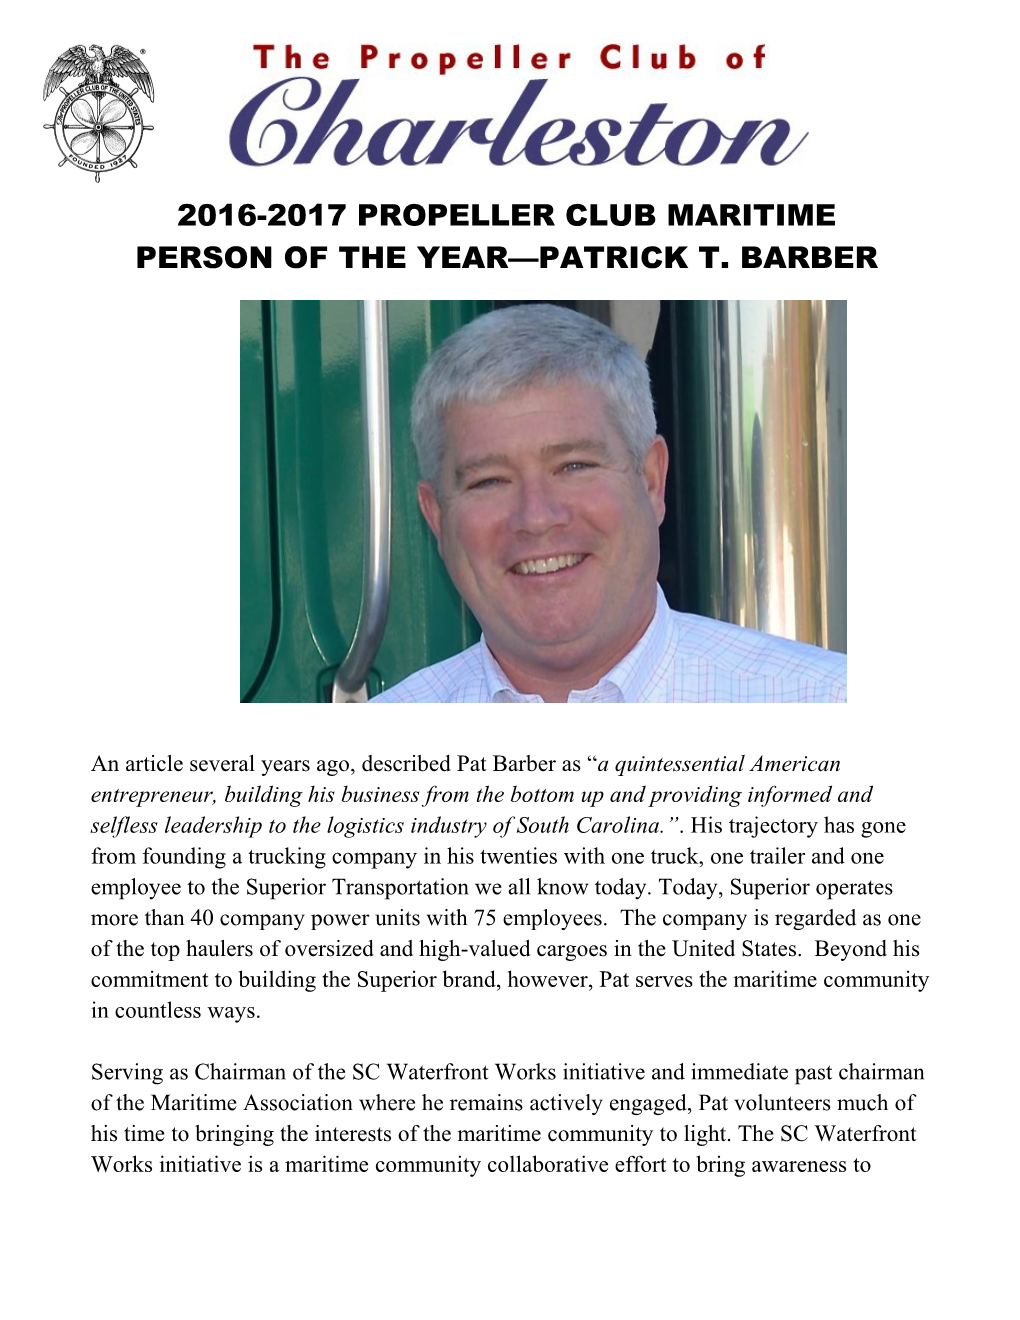 2016-2017 Propeller Club Maritime Person of the Year Patrick T. Barber